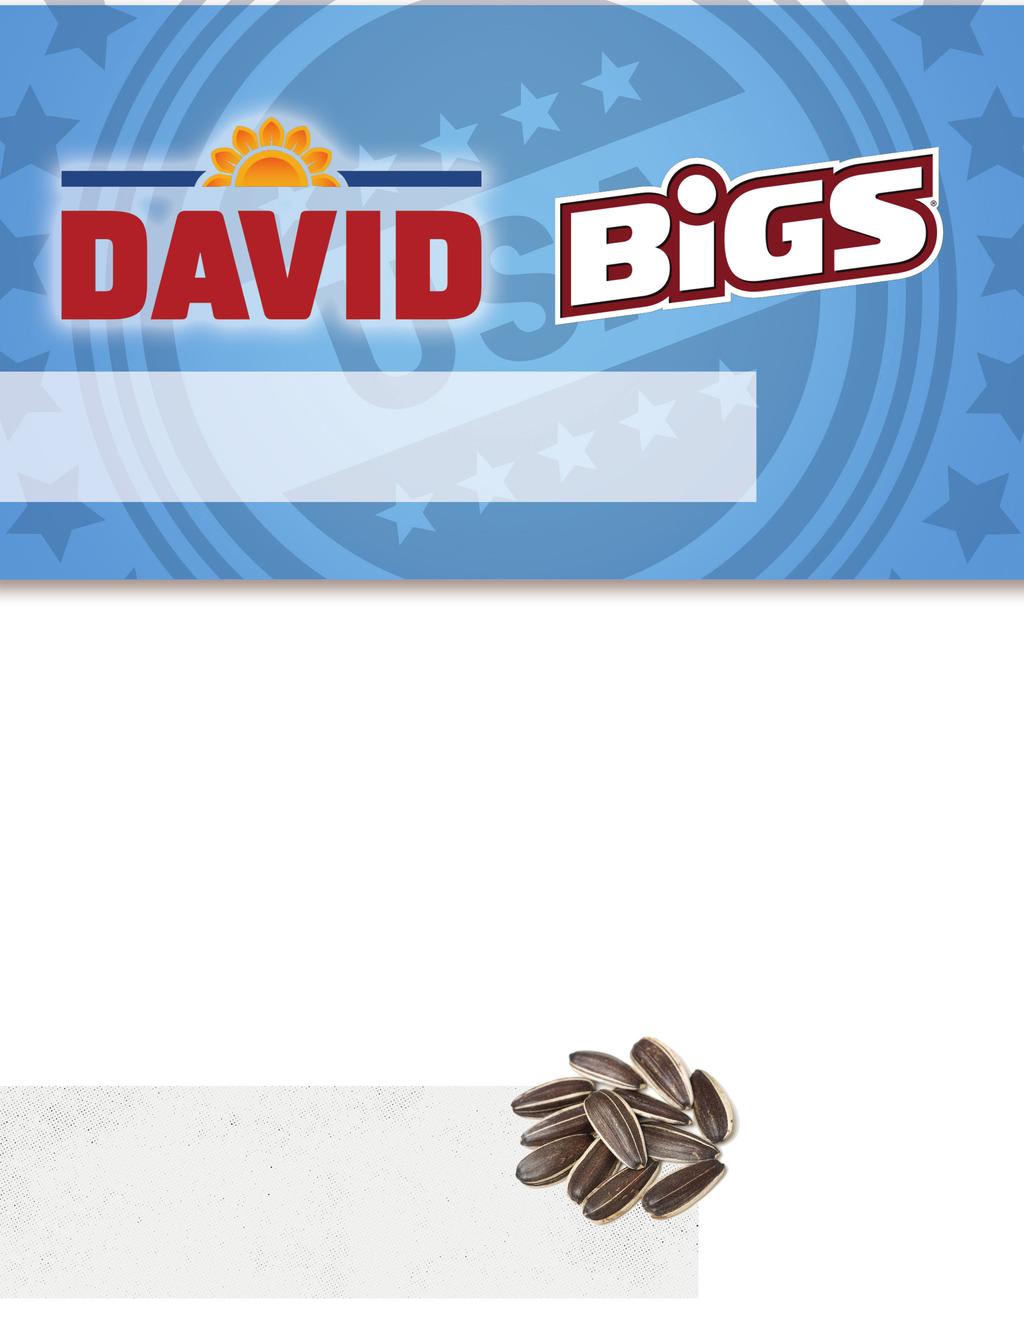 DAVID AND BiGS SEEDS Fun brands, epic tastes, huge fan bases Americans love seeds for their convenience, portability, nutrition and variety. And we have what they want.